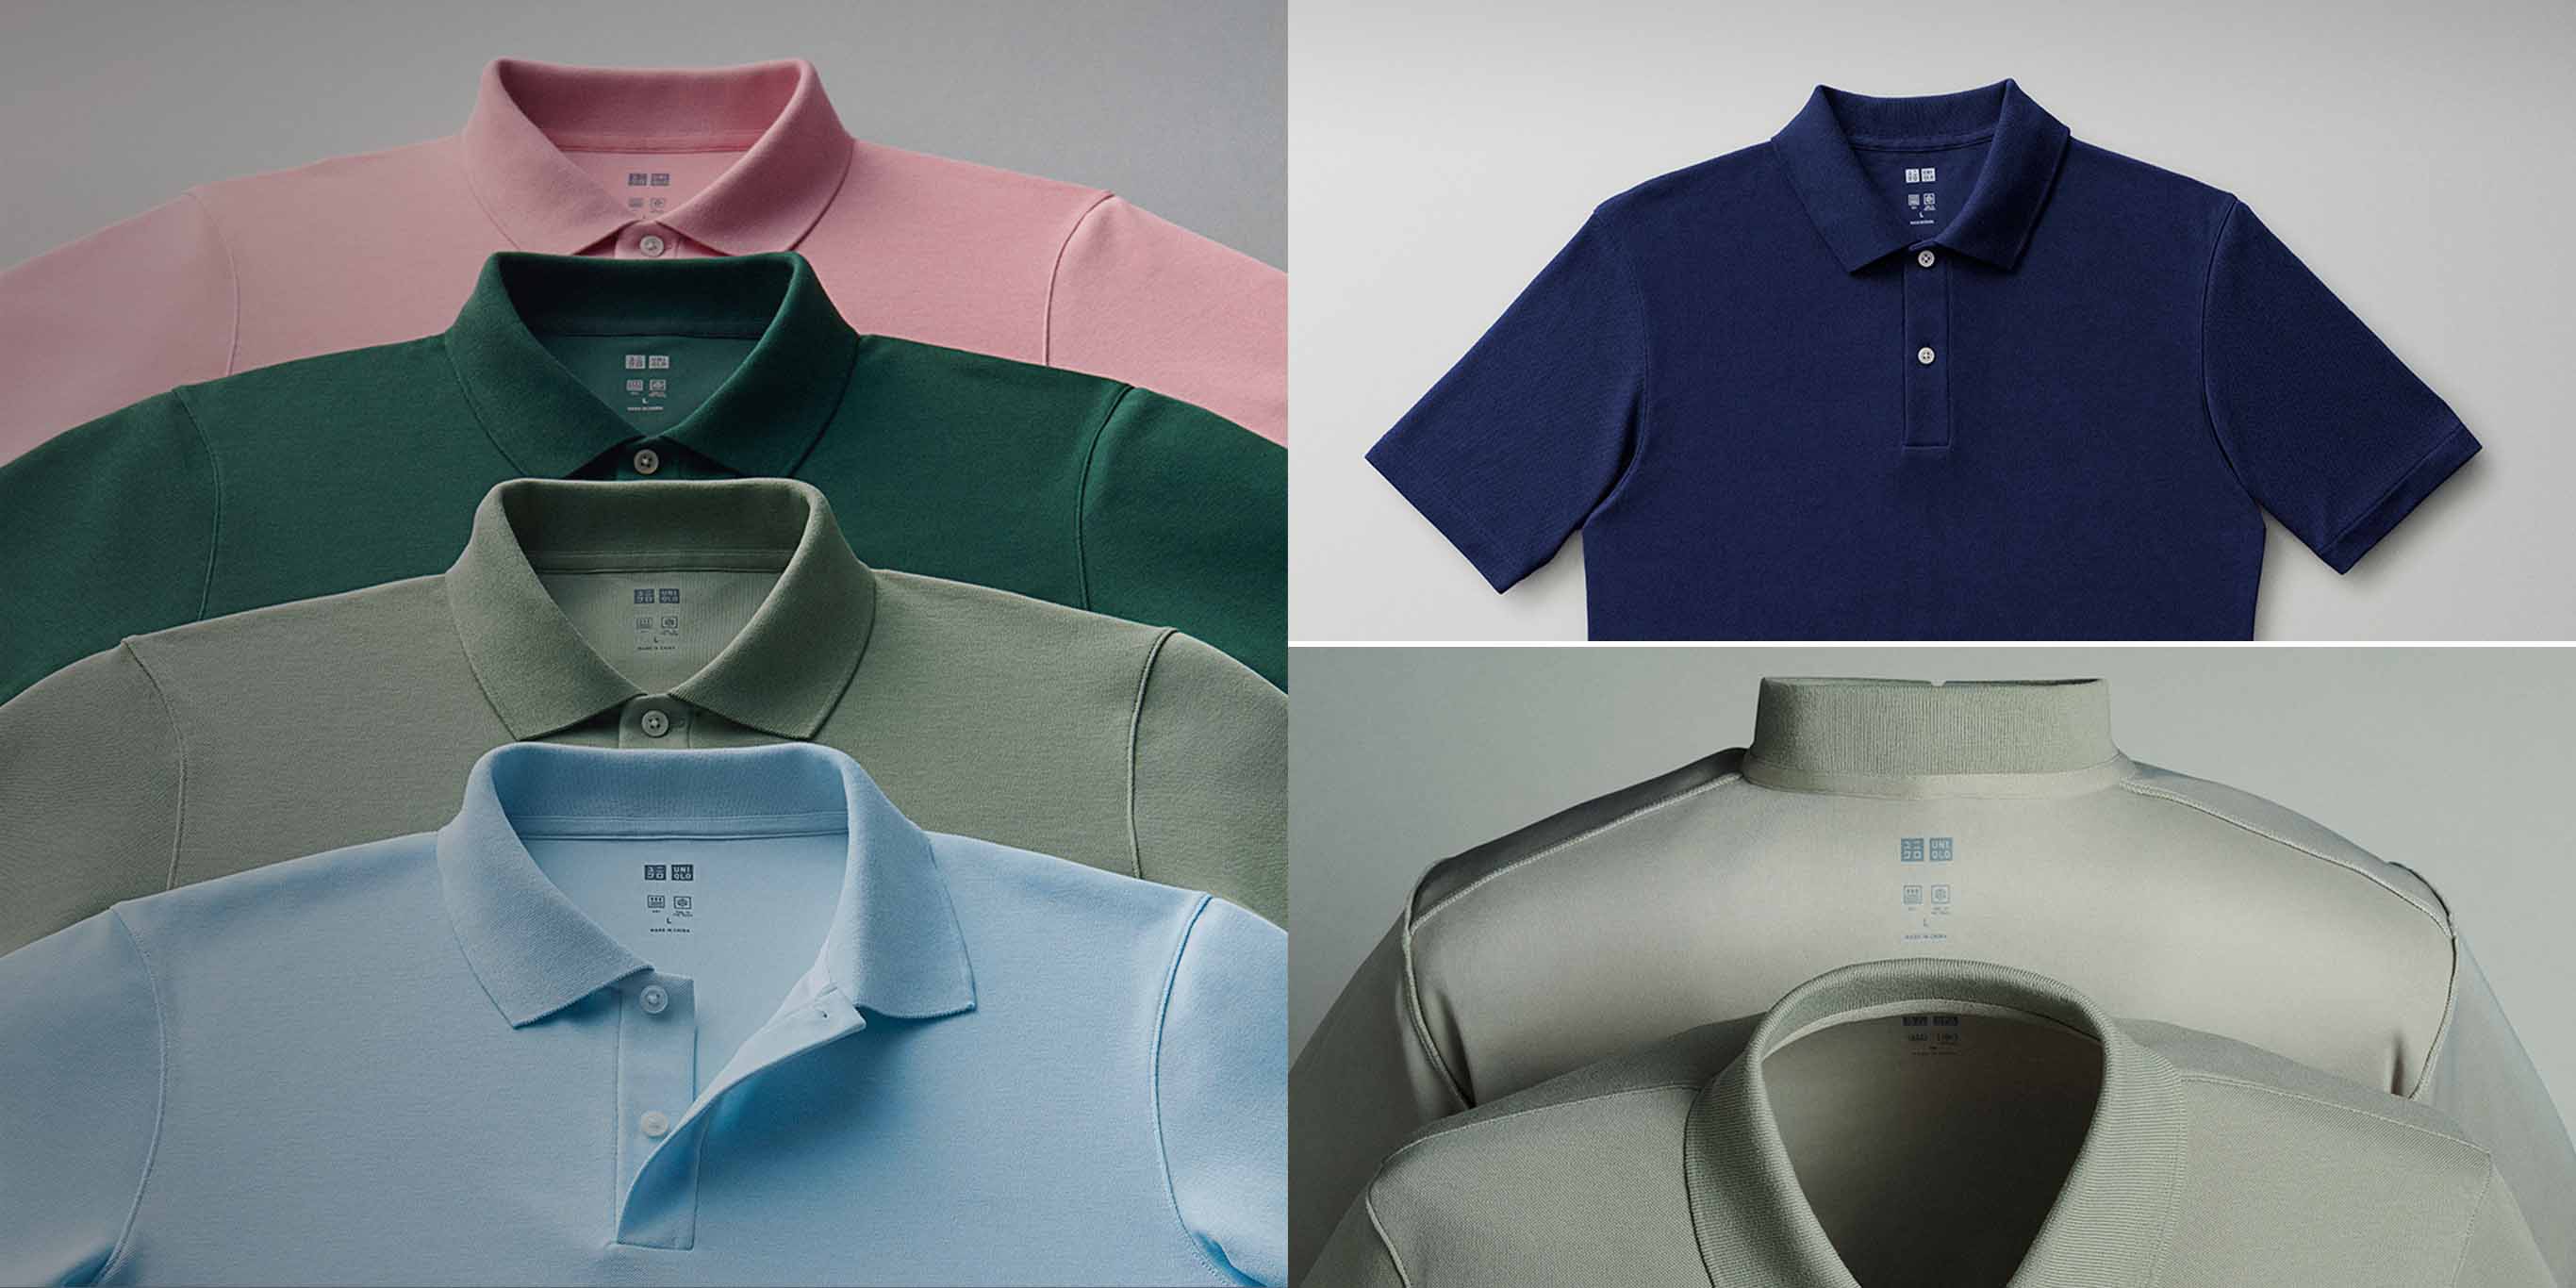 Versatile polos in modern fits and fabrics.